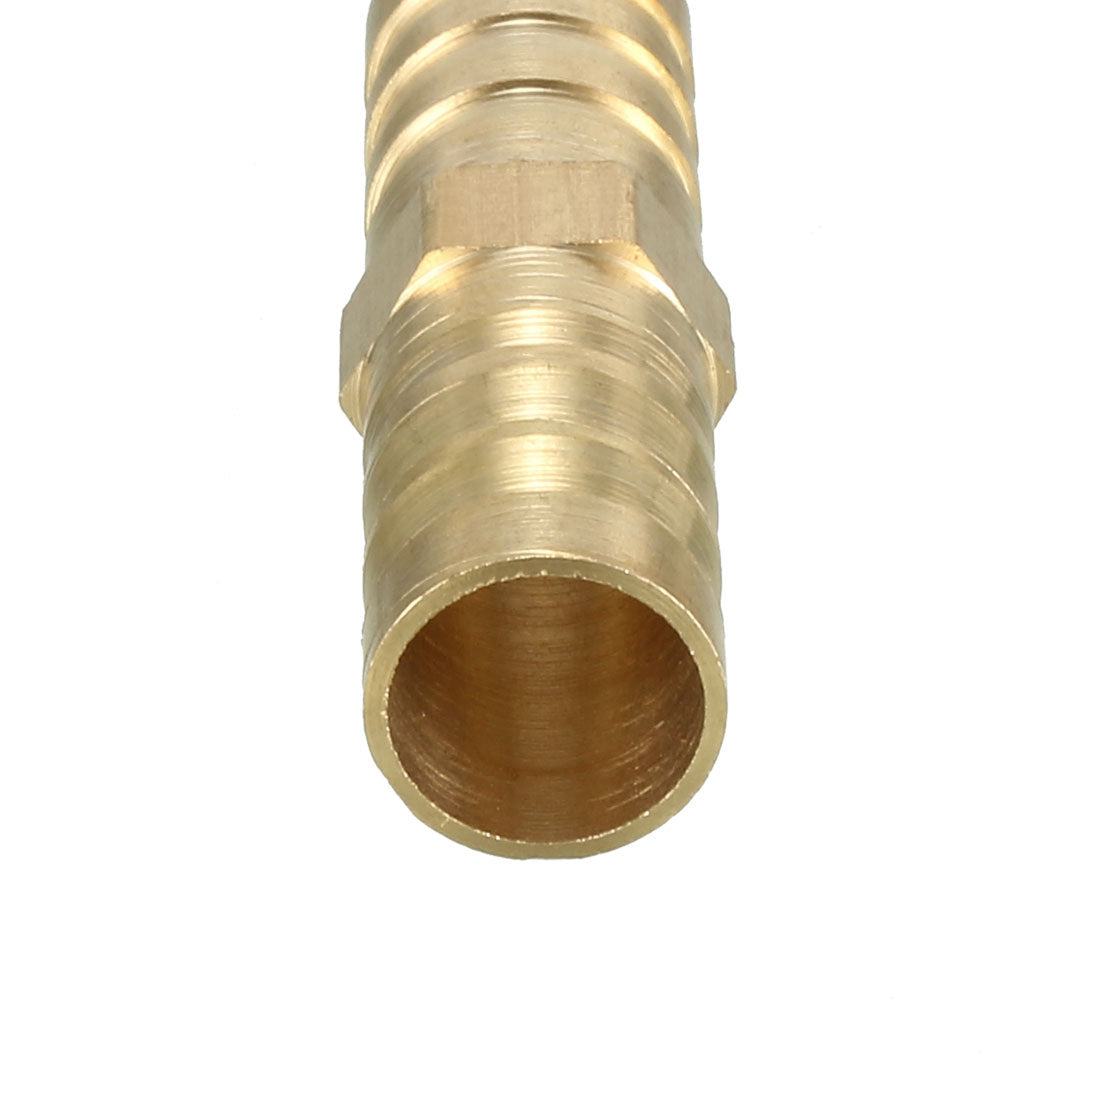 uxcell Uxcell 12mm Brass Barb Hose Fitting Straight Connector Coupler